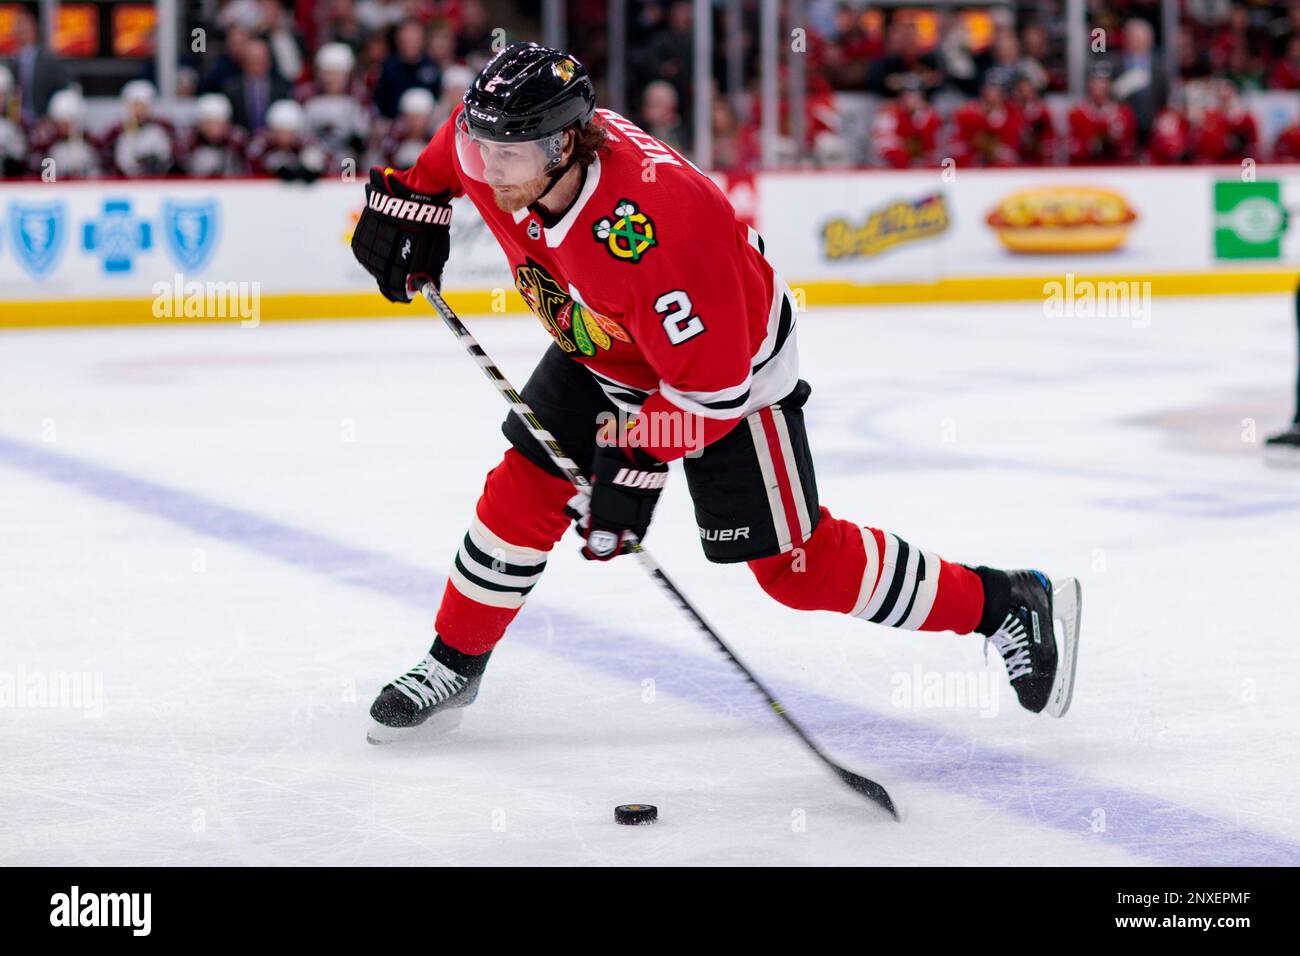 March 11, 2019: Blackhawk #88 Patrick Kane in action during the National  Hockey League game between the Chicago Blackhawks and the Arizona Coyotes  at the United Center in Chicago, IL. Mike Wulf/CSM(Credit